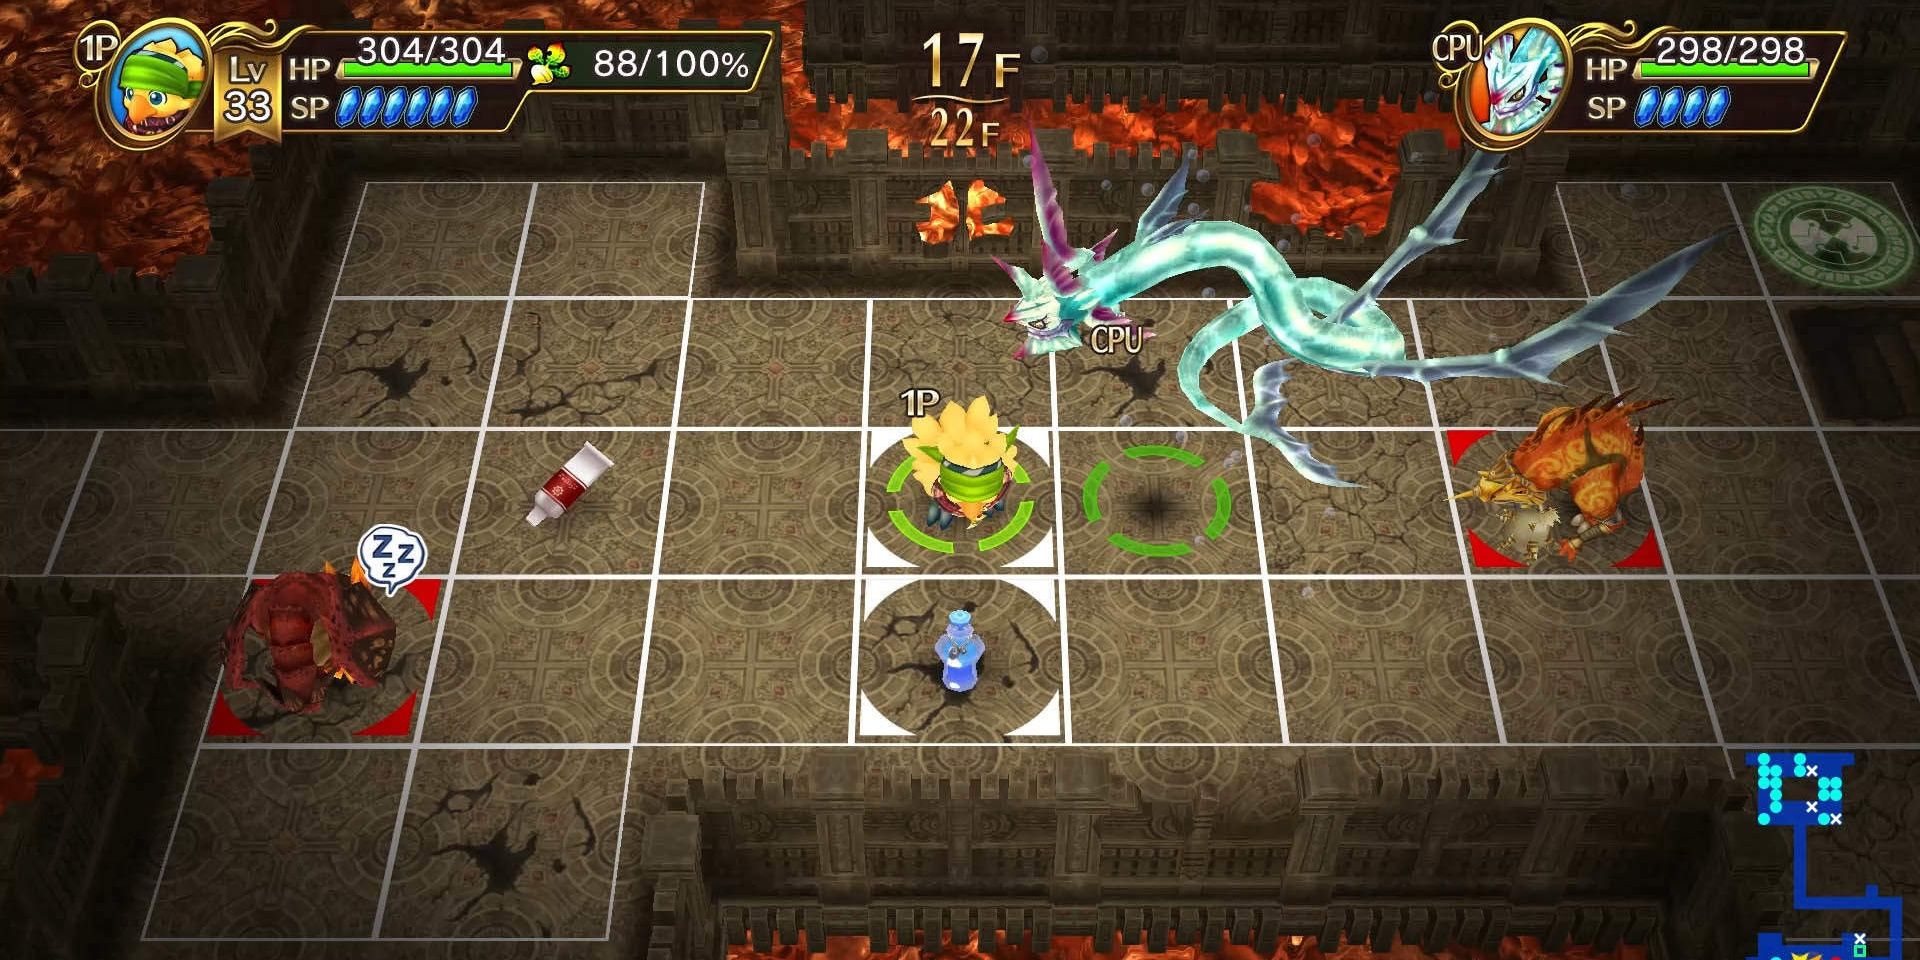 Tactical combat from Chocobo's Mystery Dungeon